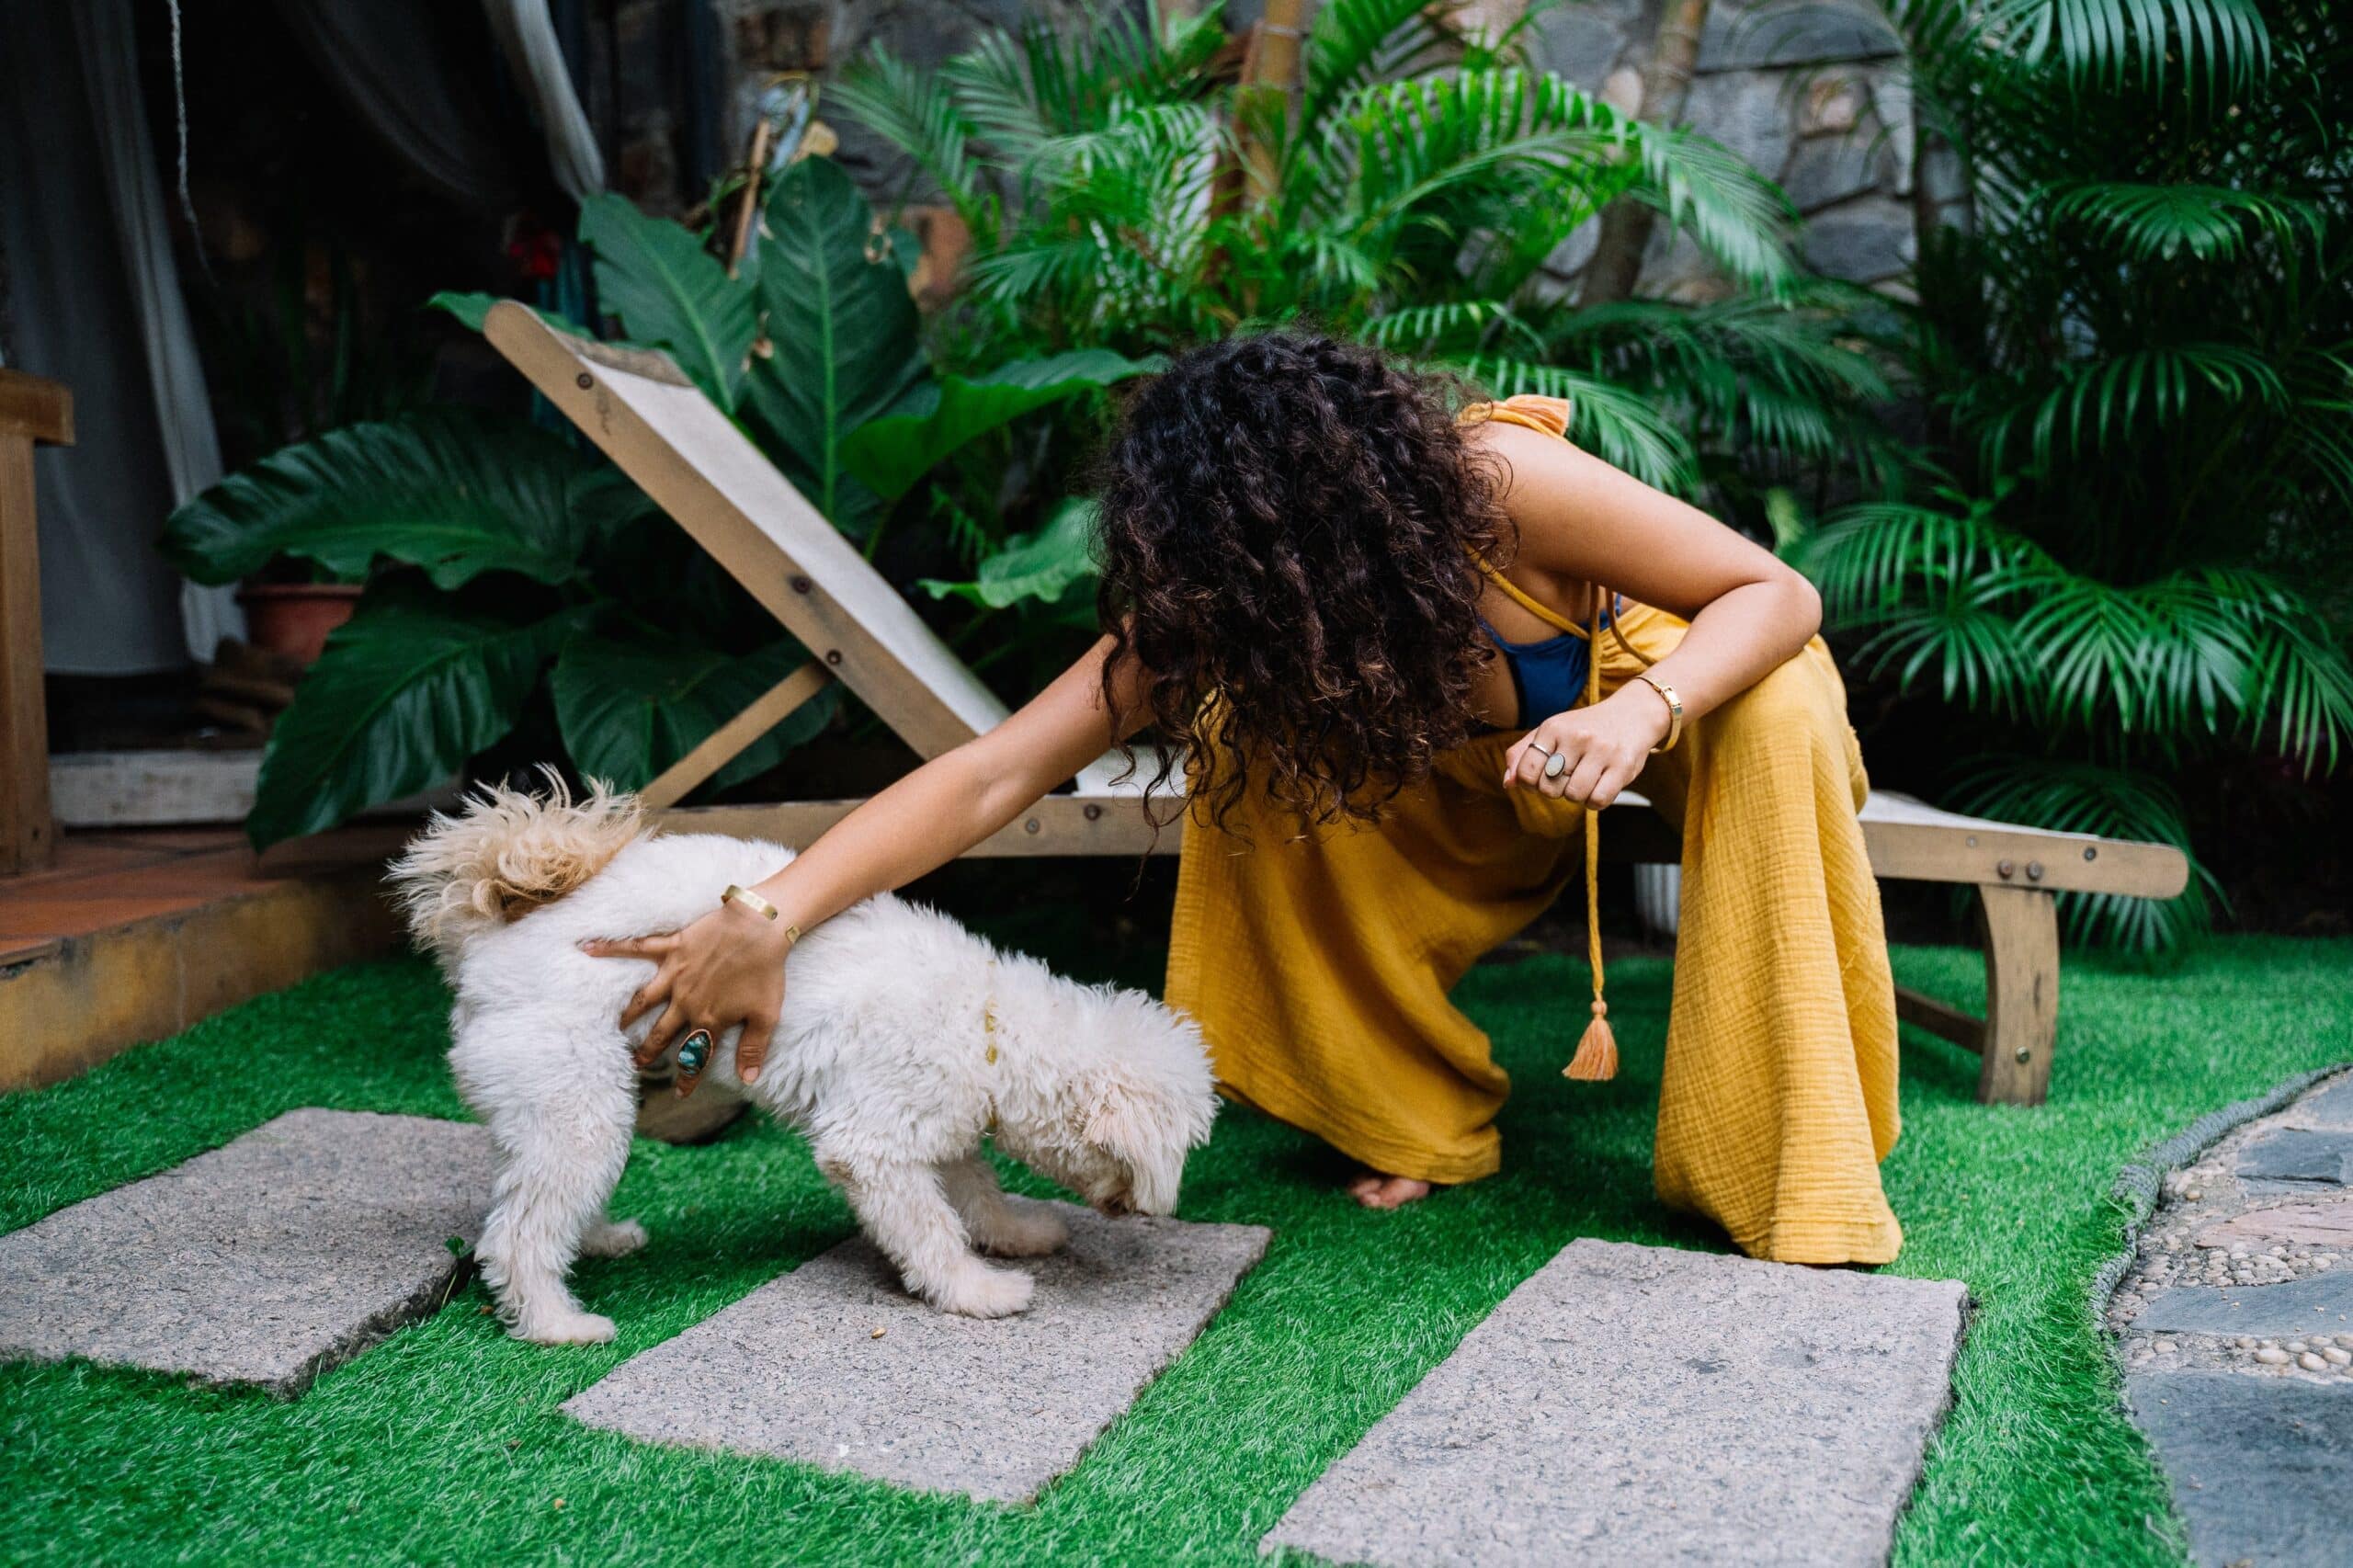 Pet sitter joyfully playing with a dog in a garden, exemplifying the dedicated, experienced, and safe pet care provided by Lifetime of Love Nannies